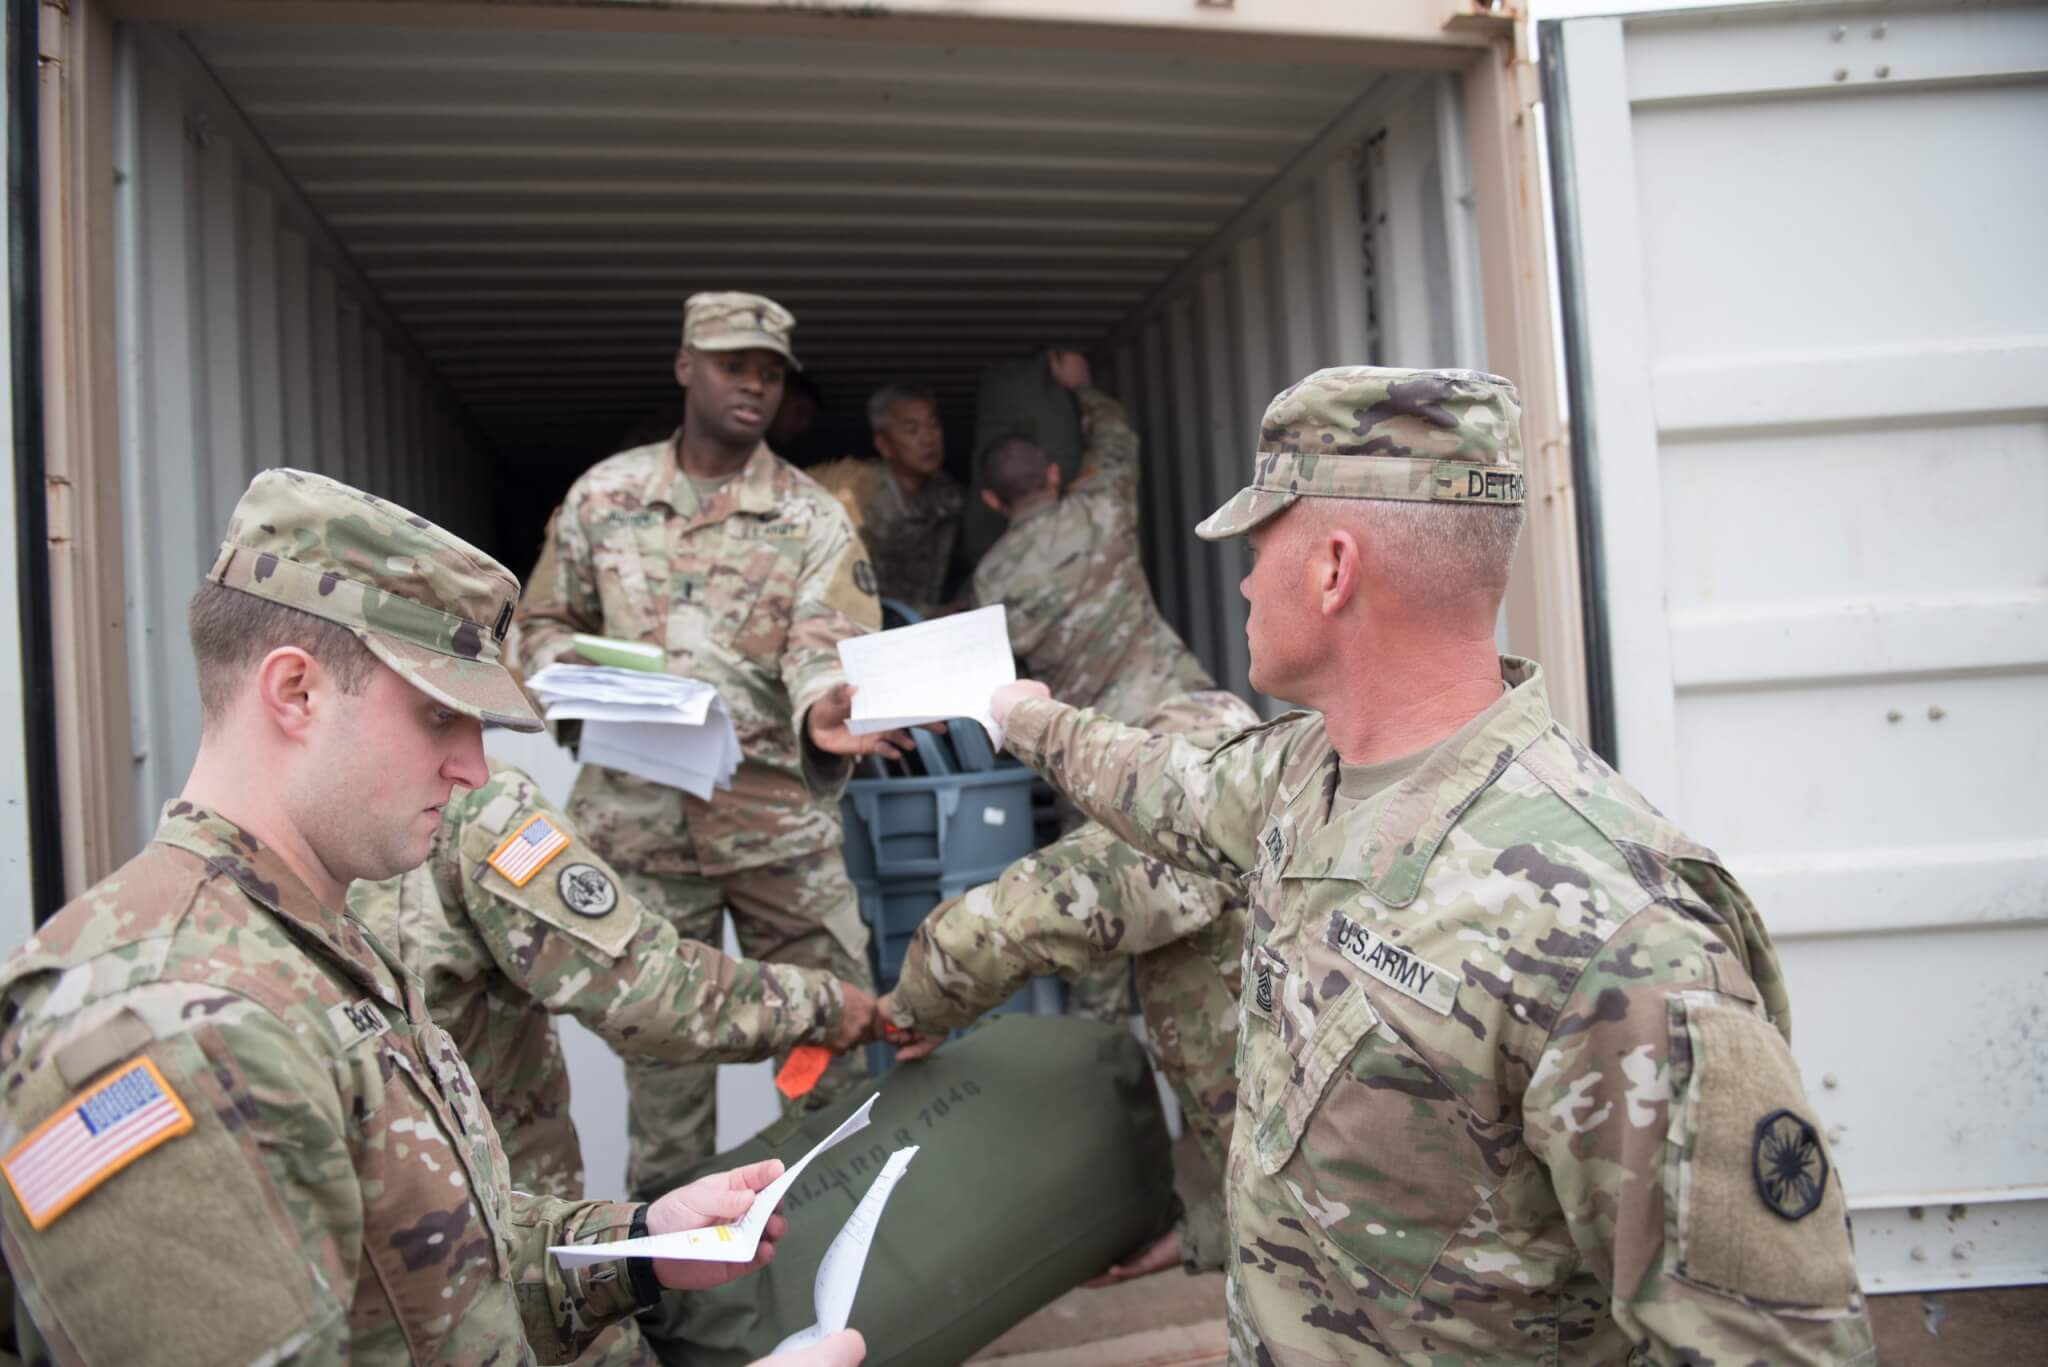 Sgt. Maj. Erick M. Detrich, HHC, 13th ESC Plans Sergeant Major, hands in his duffle bag inventory sheet as he loads his bag in the connex.  As vehicles and equipment begin the process of being transported in support of DEFENDER- Europe 20 and preparations continue, the first wave of Soldiers from 13th ESC will deploy to Eastern Europe this month.